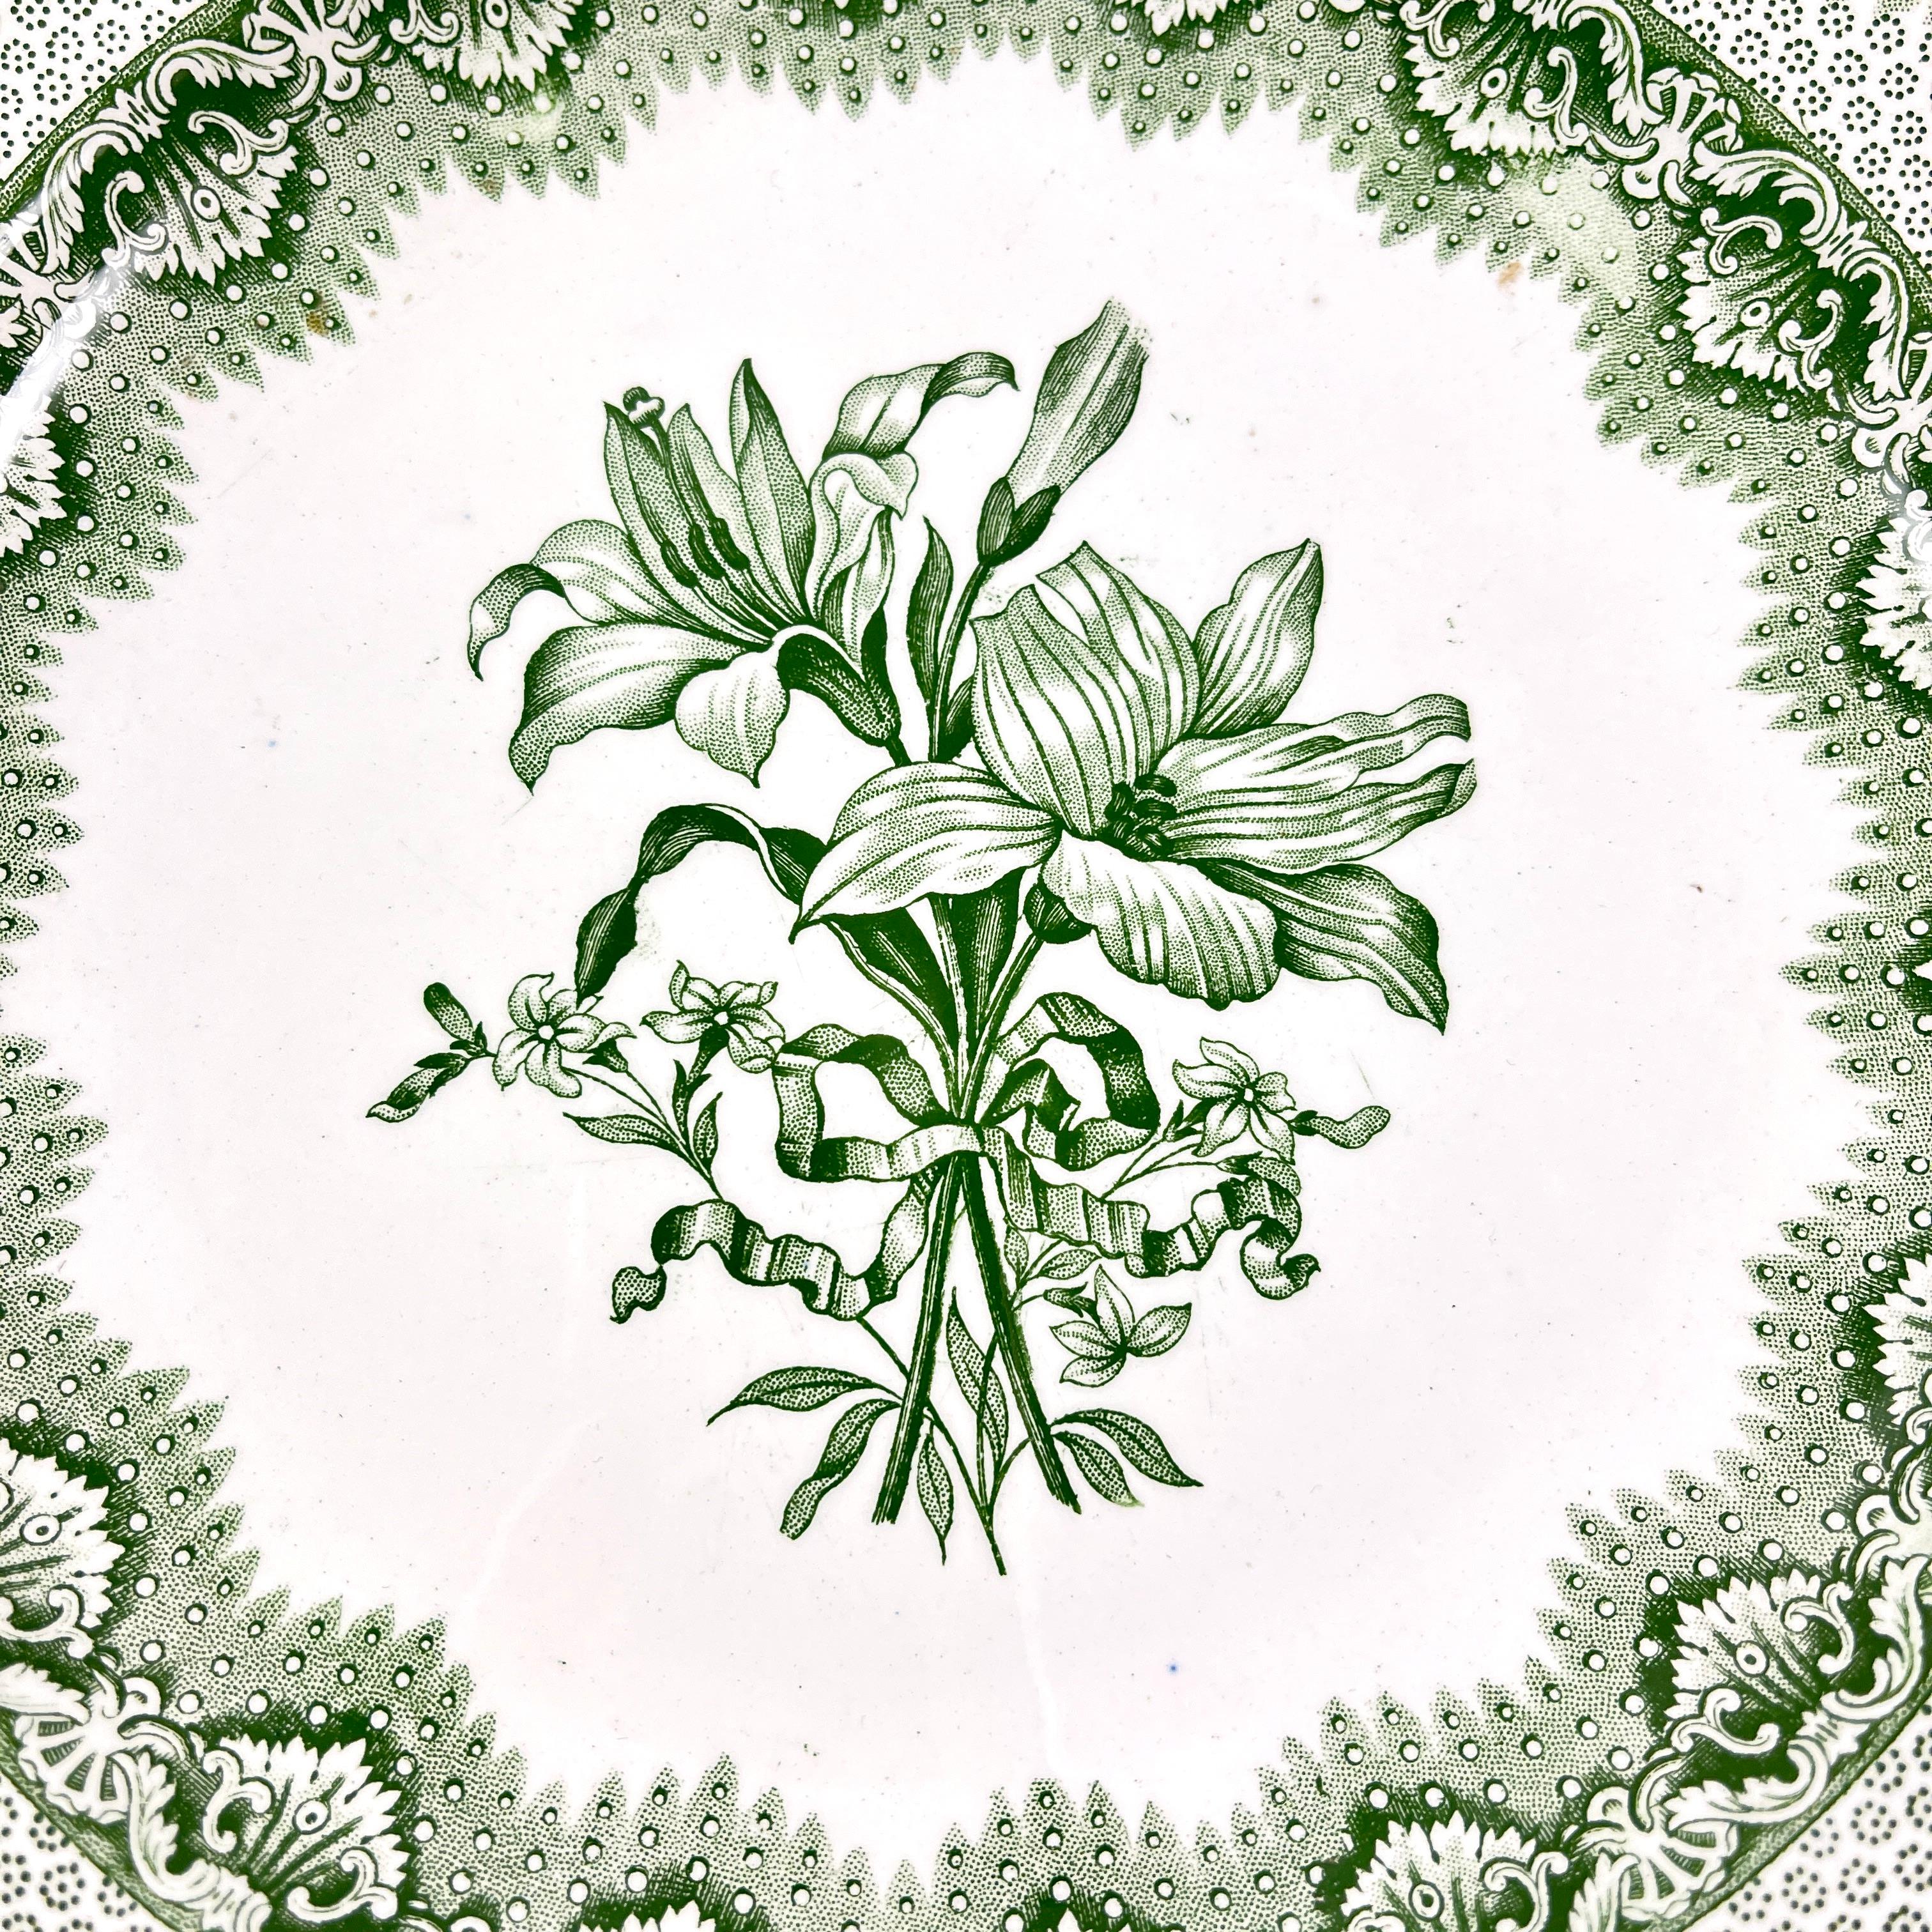 Earthenware Late Spode Copeland Garrett Green Lily Luncheon Plates 1830s, Set of 6   For Sale